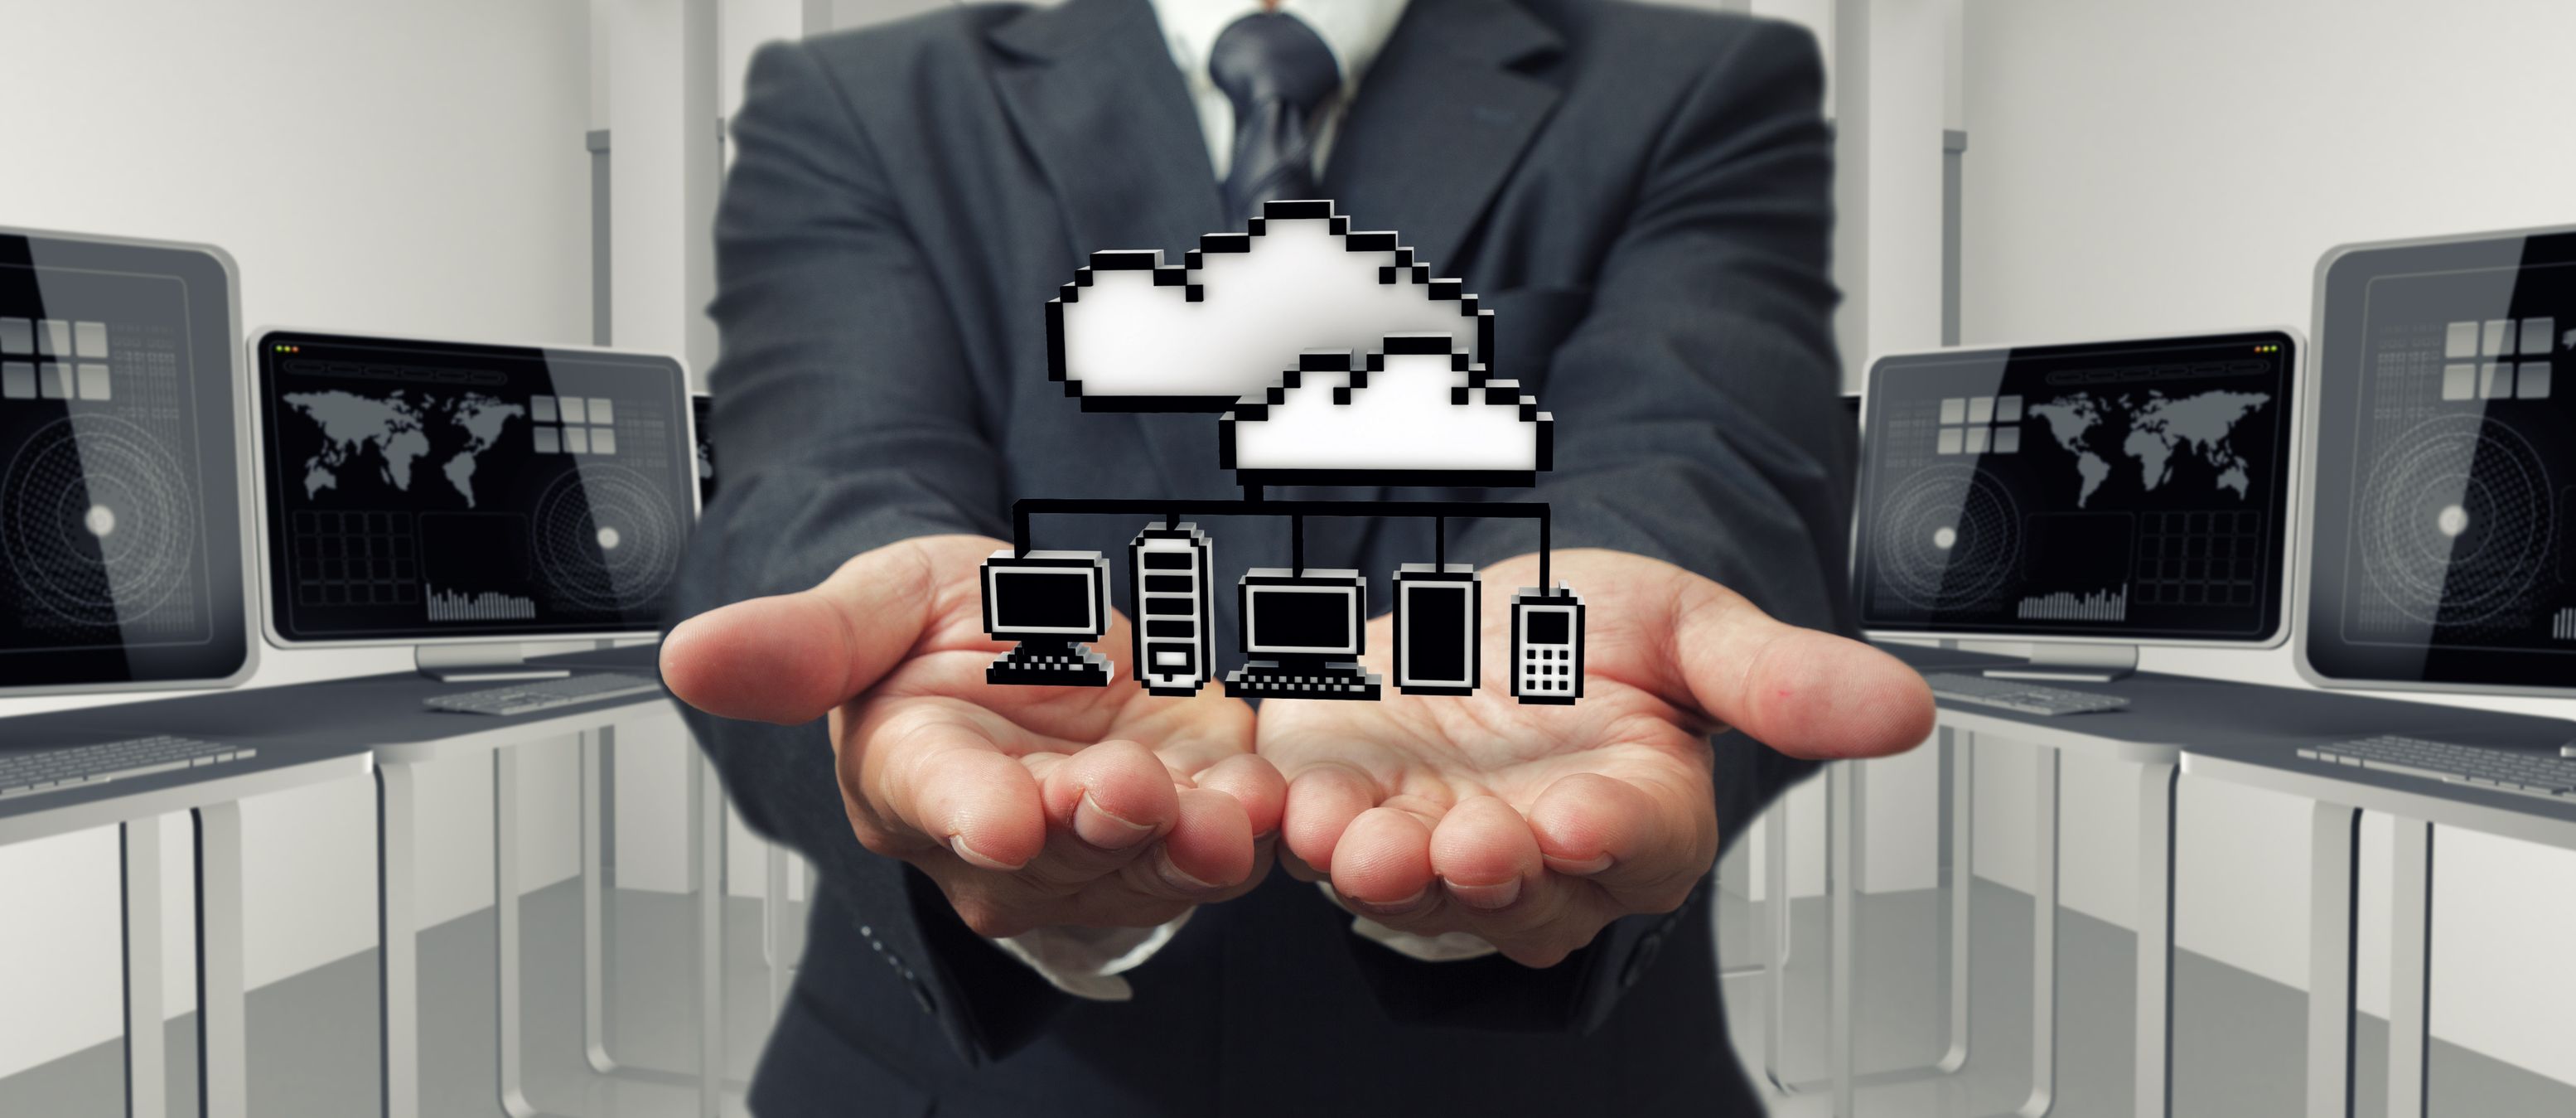 Eight Ways To Ensure A Successful Cloud Migration